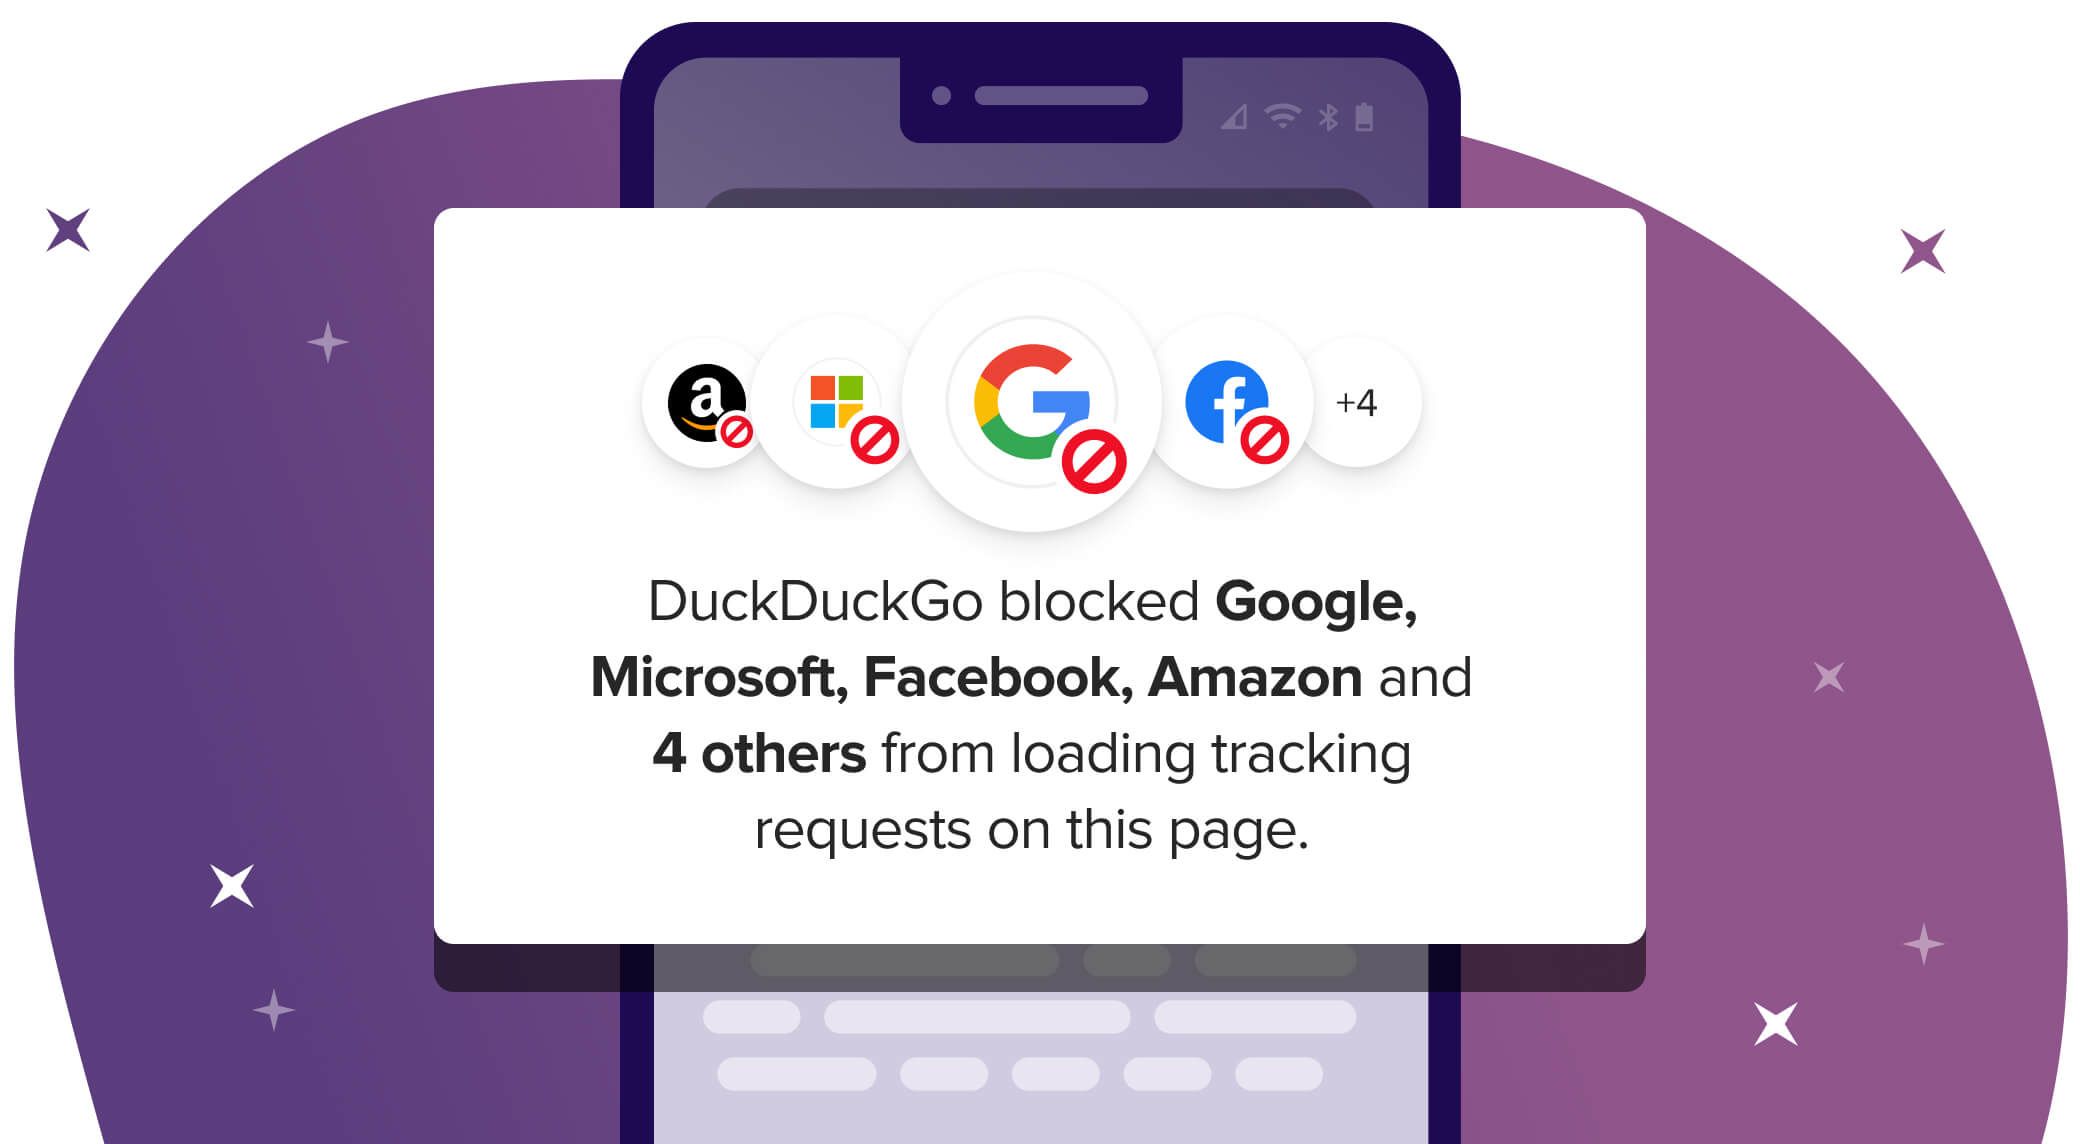 Following debacle, DuckDuckGo blocks most Microsoft web trackers and opens up about blocklist